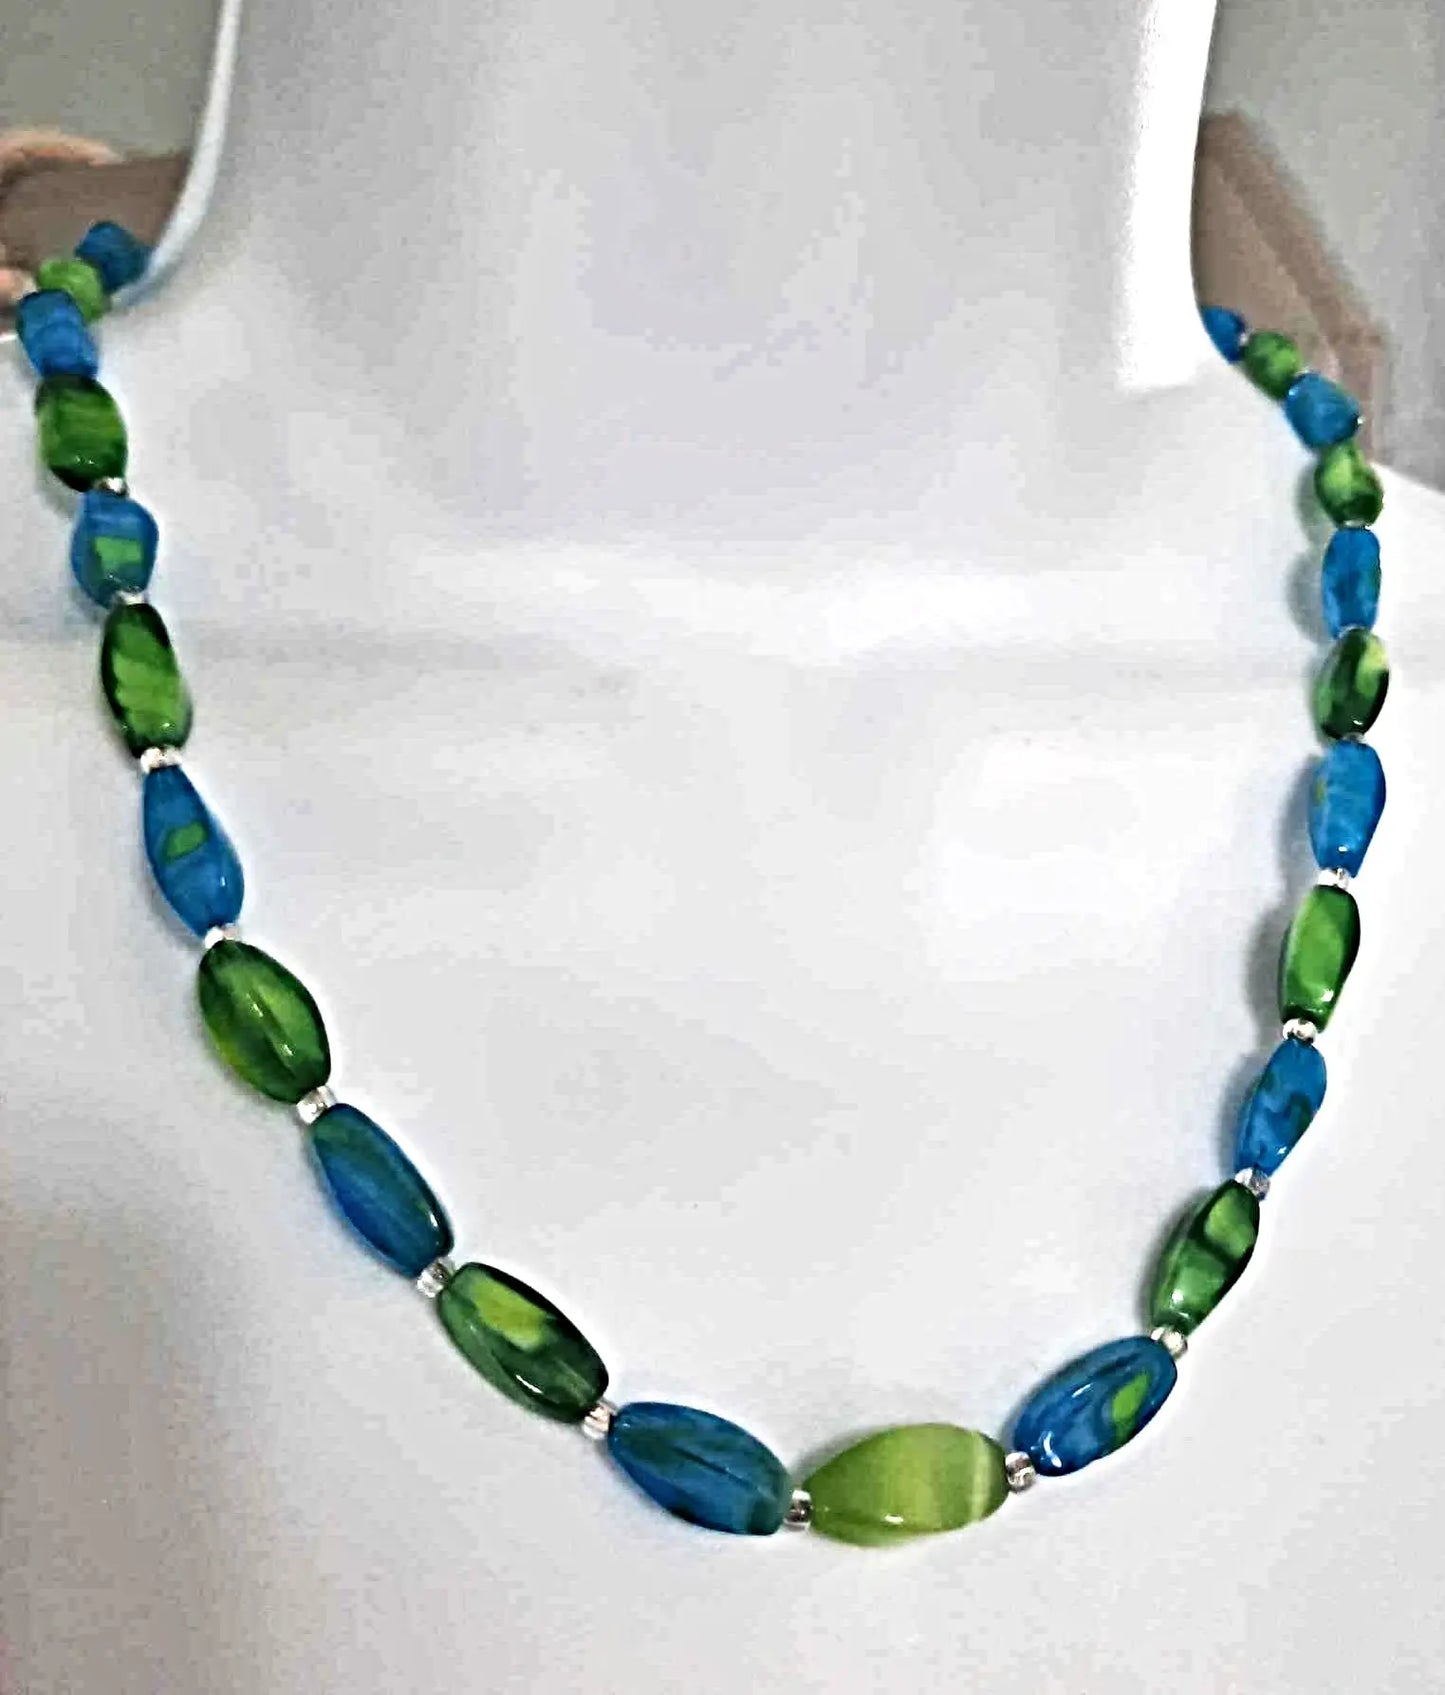 Peacock color acrylic necklace by Linda - Image #2